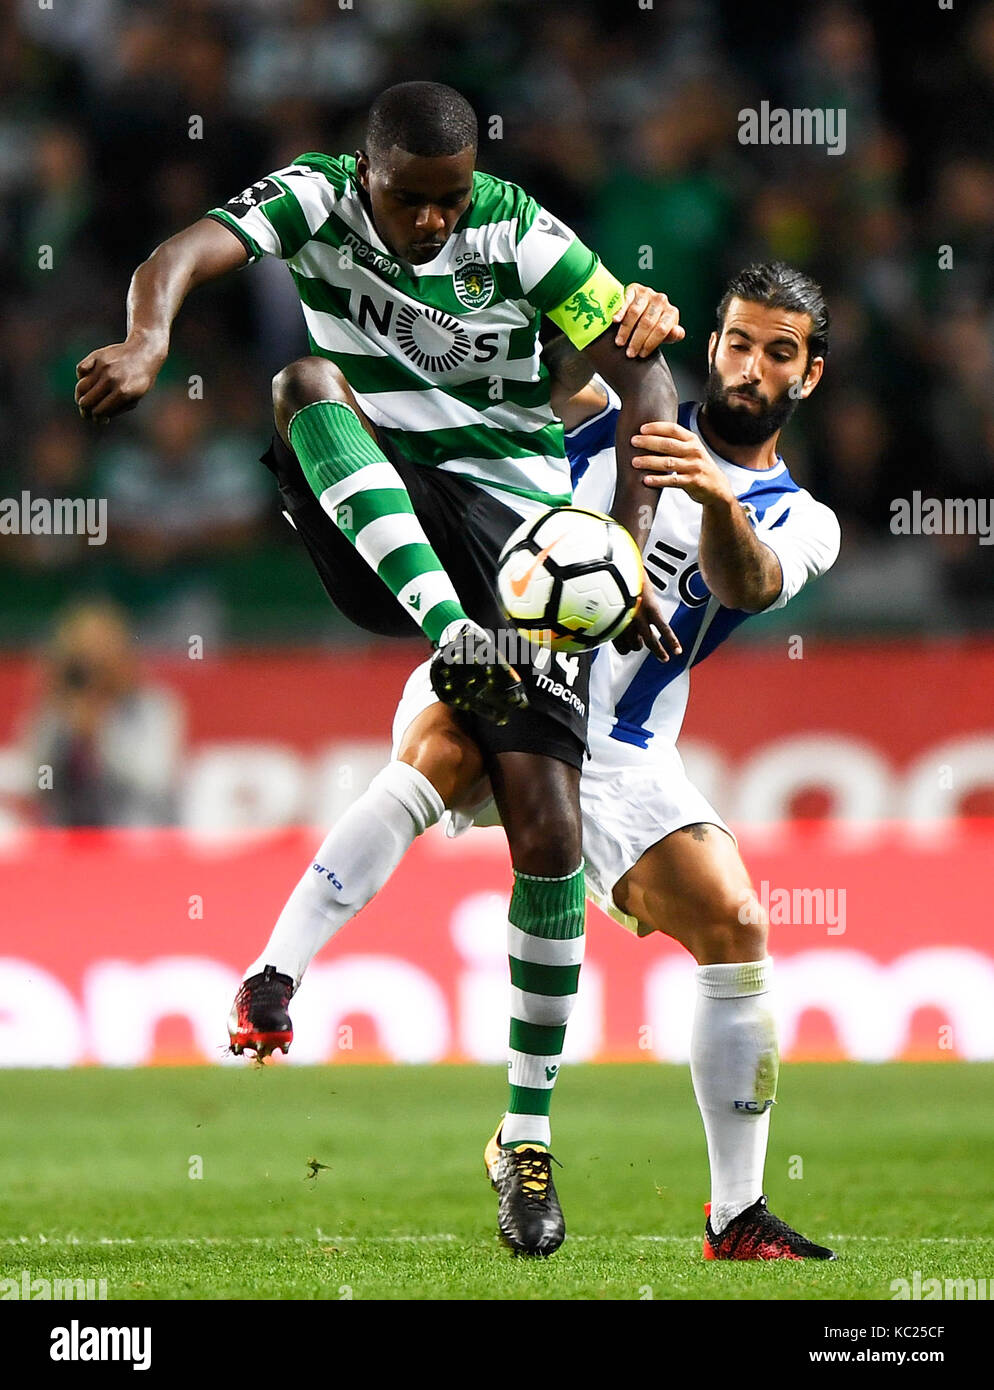 Lisbon. 1st Oct, 2017. Sporting's William Carvalho (L) vies with Porto's Sergio Oliverira during the Portuguese League soccer match between Sporting CP and FC Porto at the Alvalade stadium in Lisbon, Portugal on Oct. 1, 2017. The match ended with a 0-0 draw. Credit: Zhang Liyun/Xinhua/Alamy Live News Stock Photo